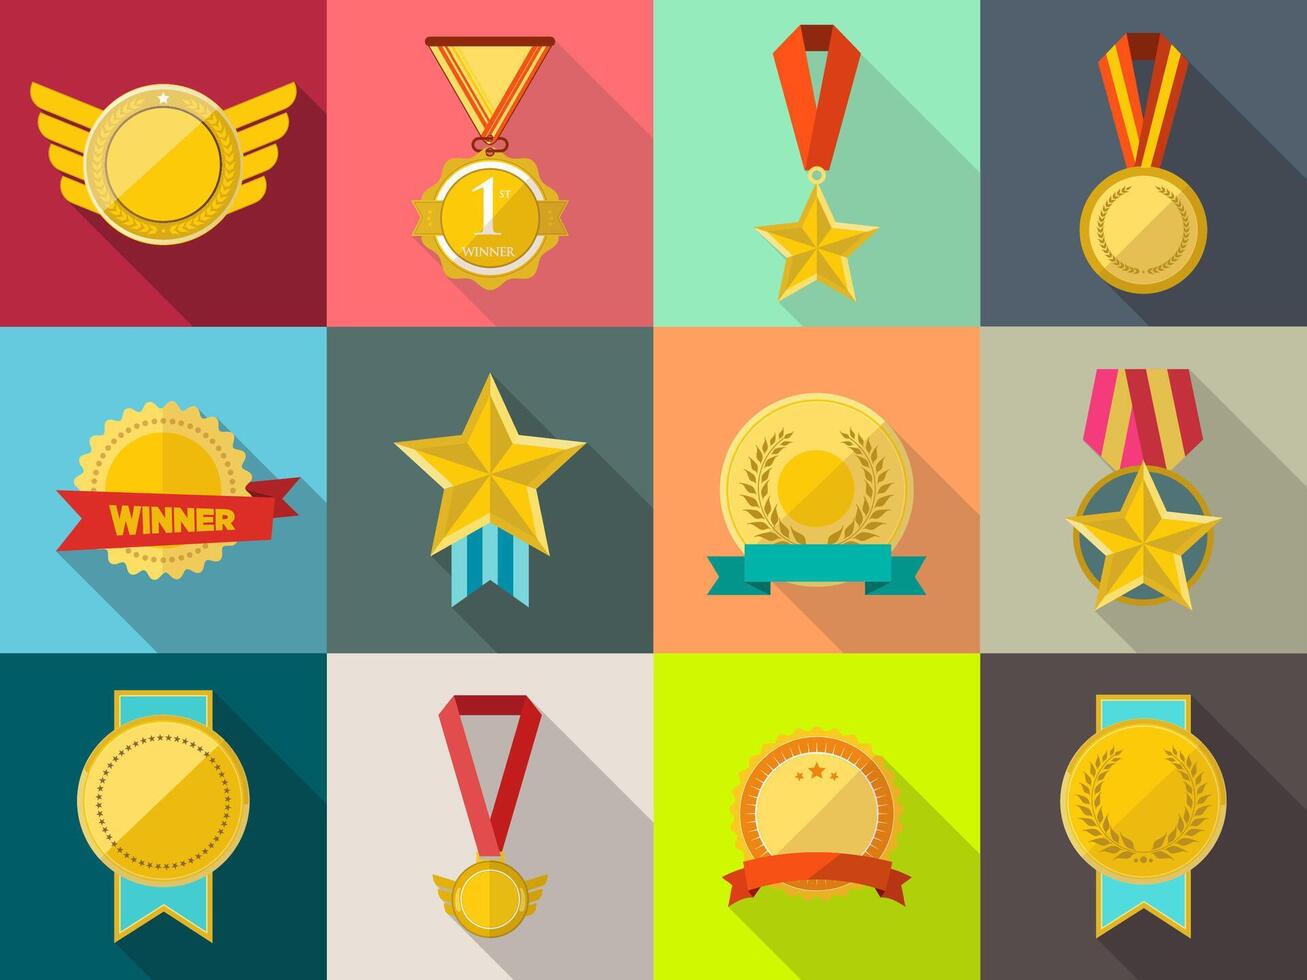 Trophy and awards icons flat design style vector illustration